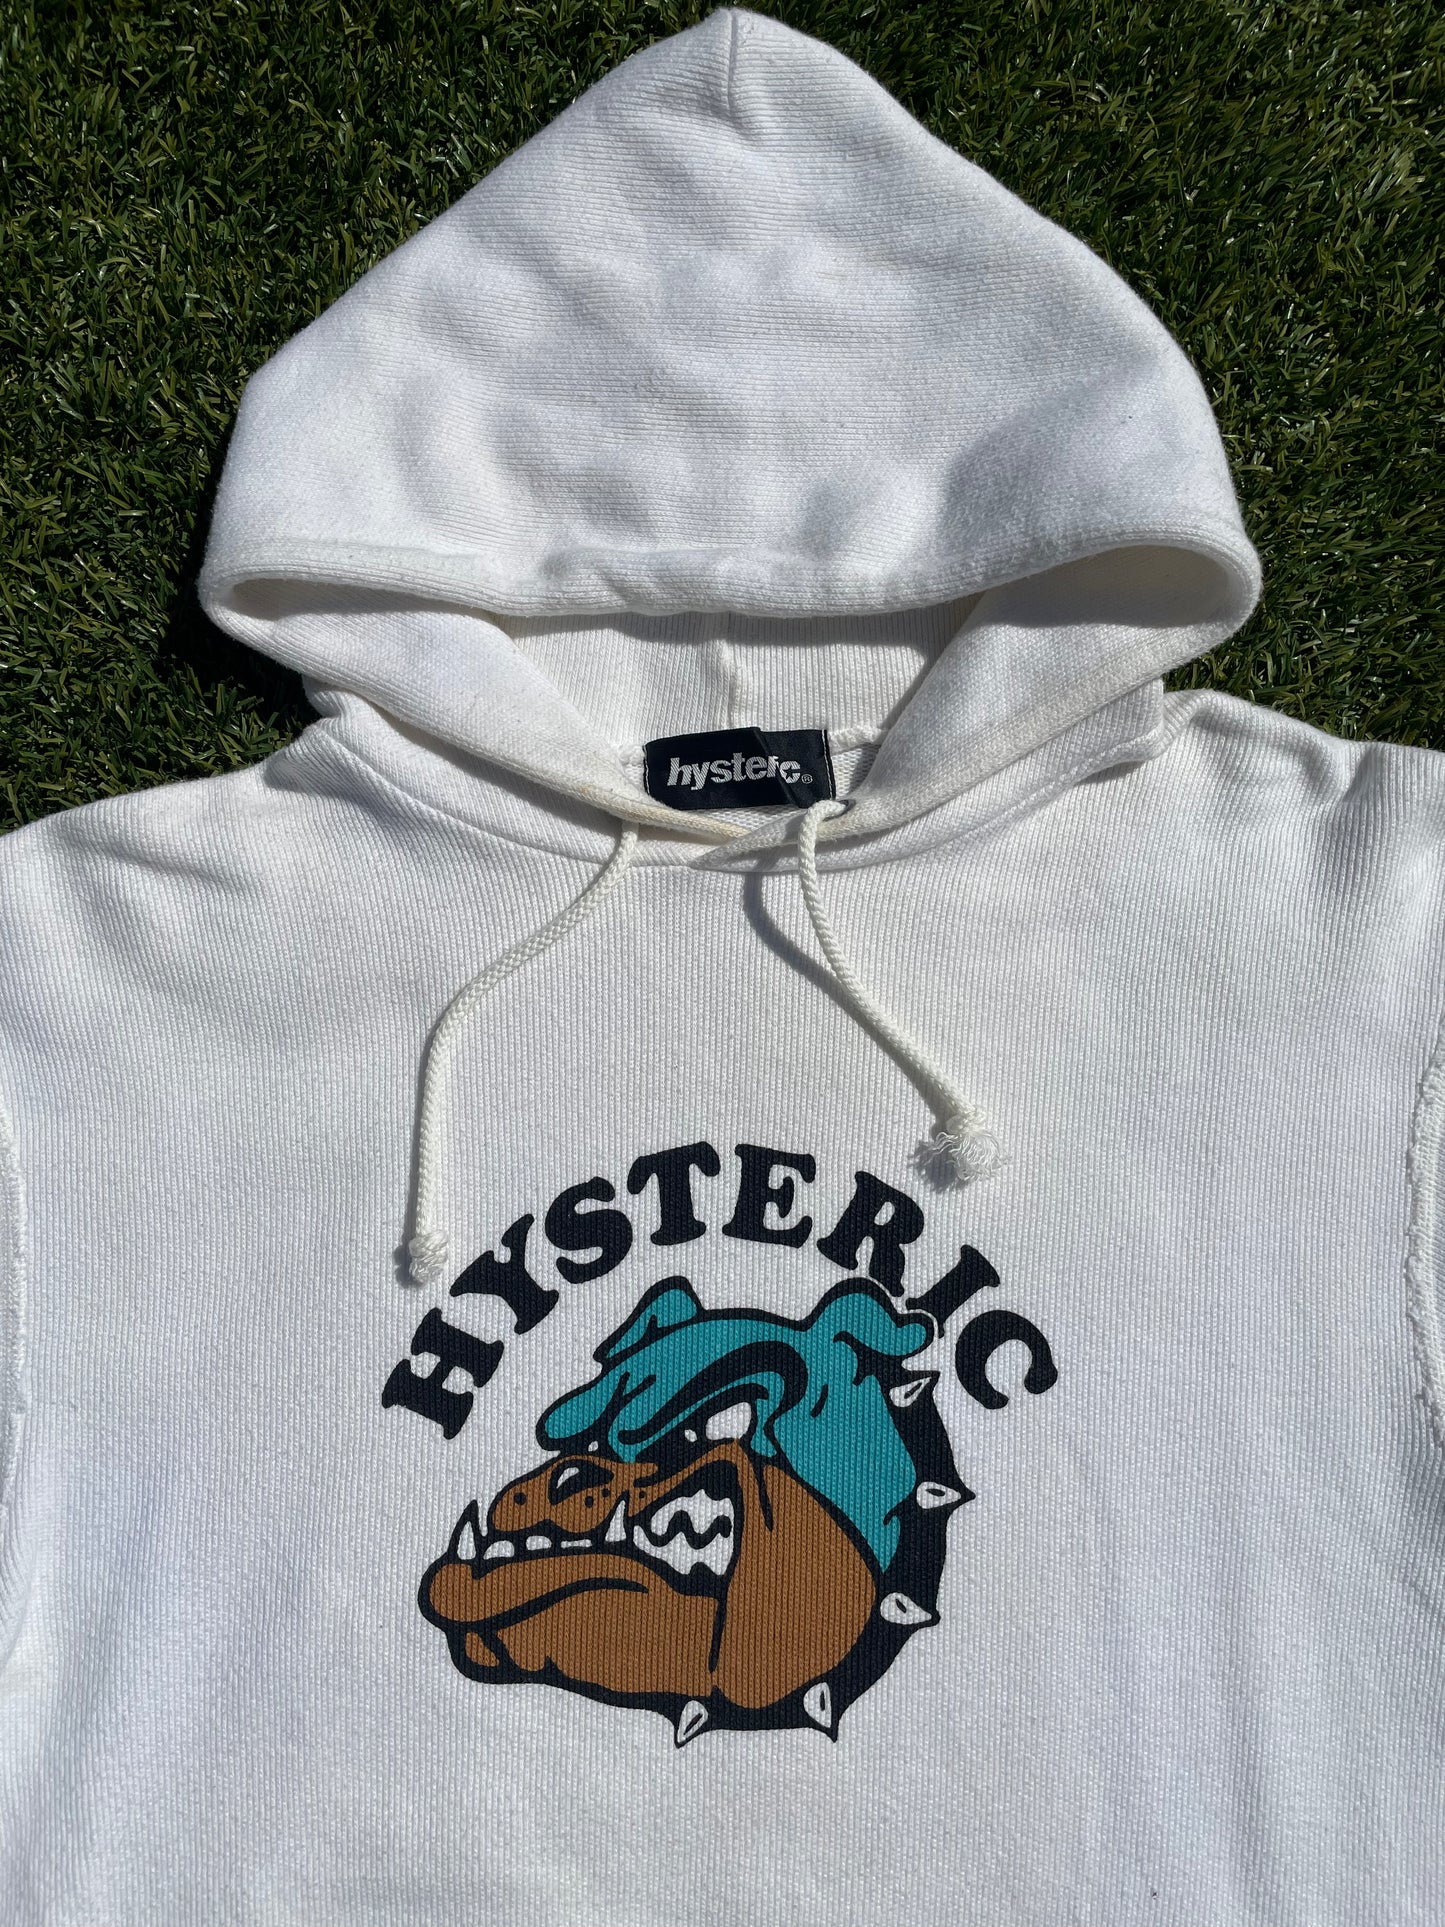 1990s Hysteric Glamour Bulldog Pack